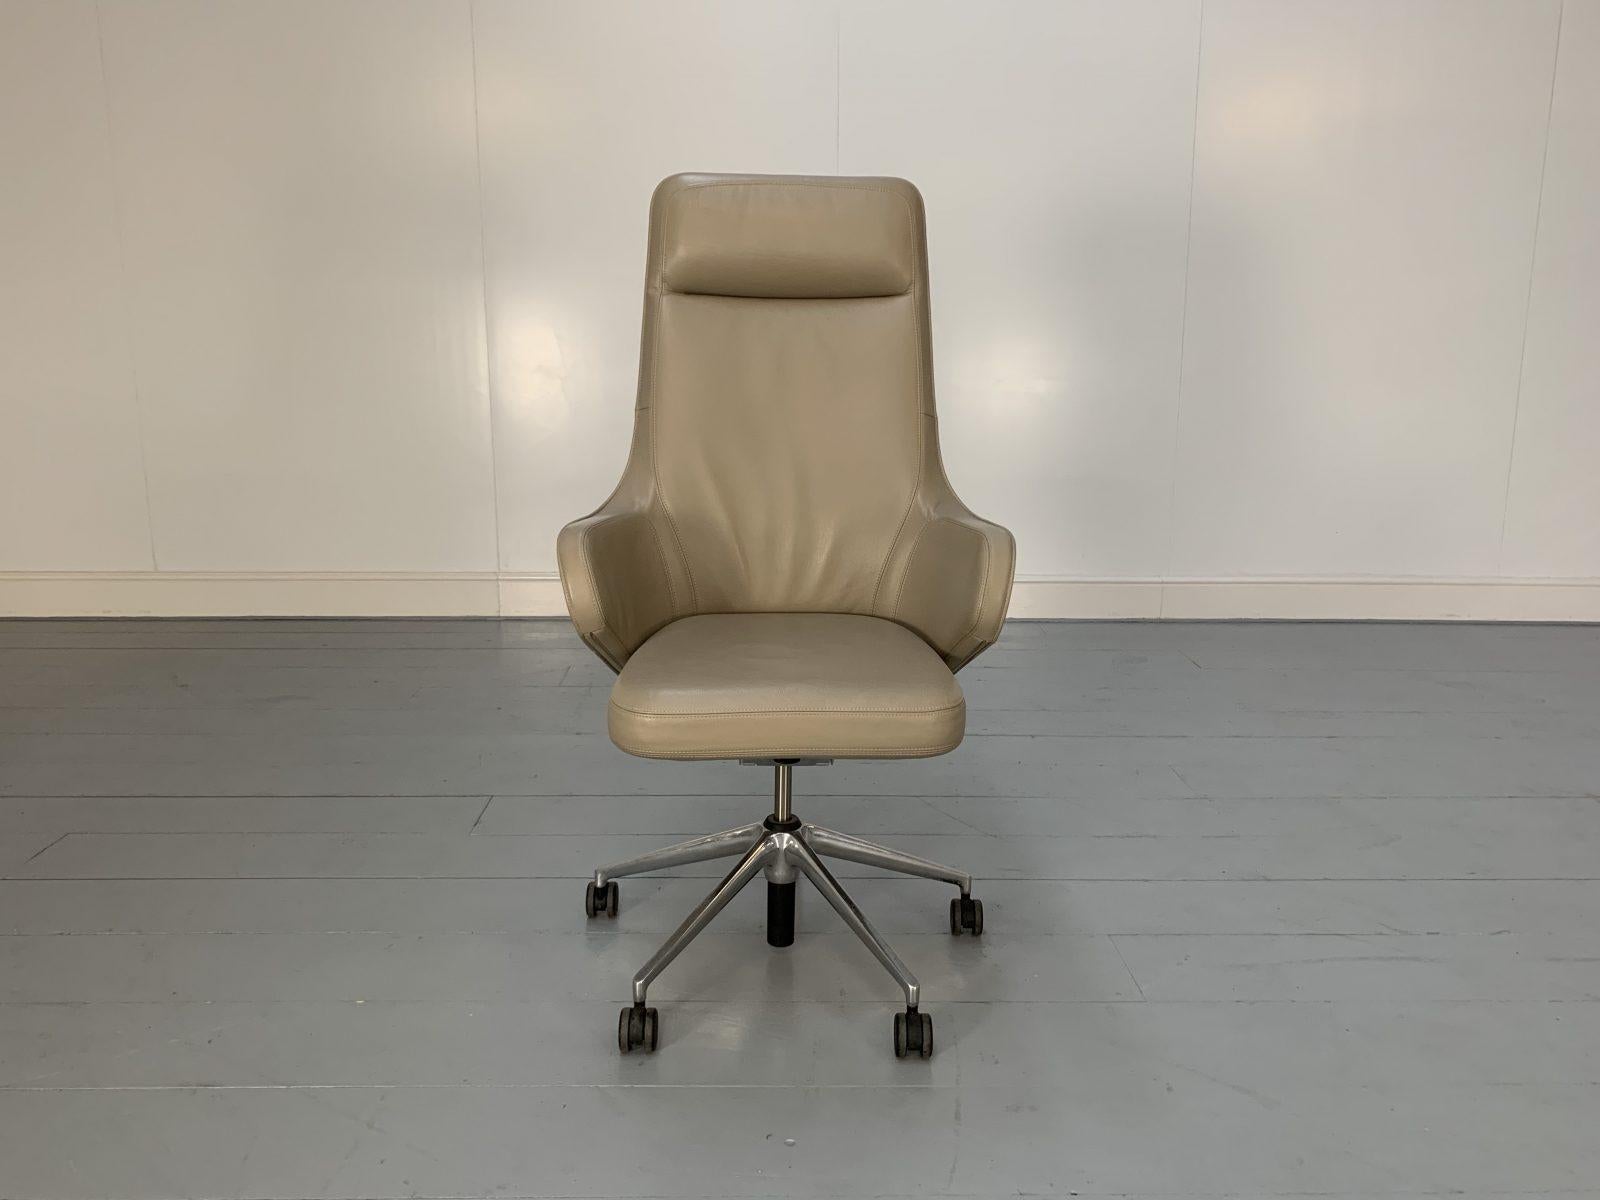 This is one of the most handsome, refined office chairs you could ever hope to find.

This is an ultra-rare opportunity to acquire what is, unequivocally, the best of the best, it being a most spectacular, immaculate, beautifully-presented Vitra